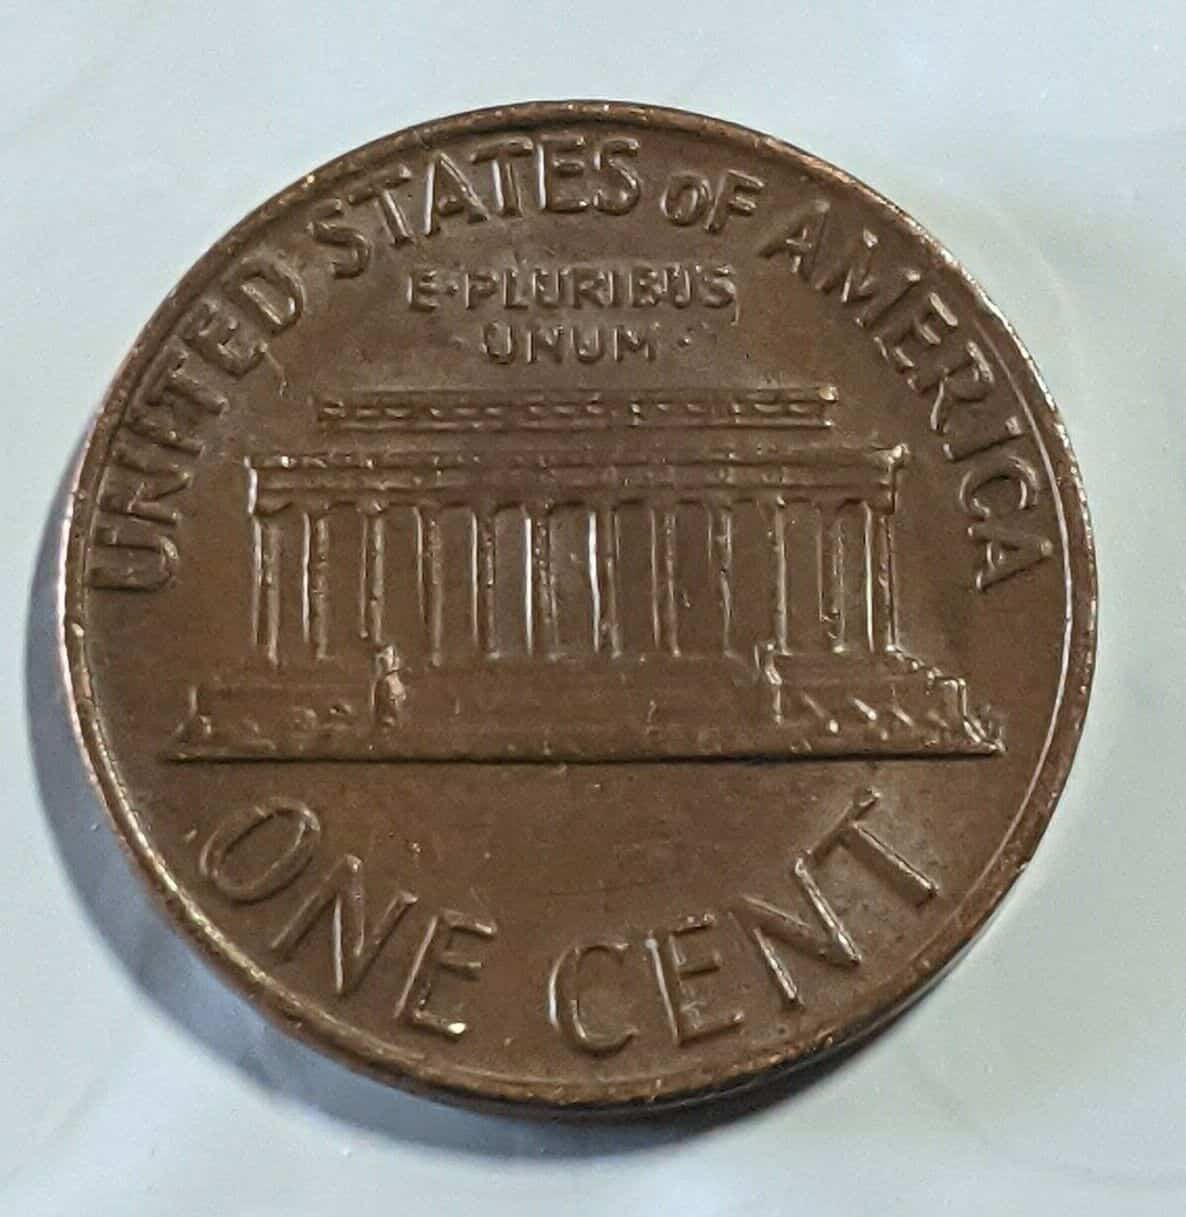 1969 D Floating Roof and Missing Details Penny